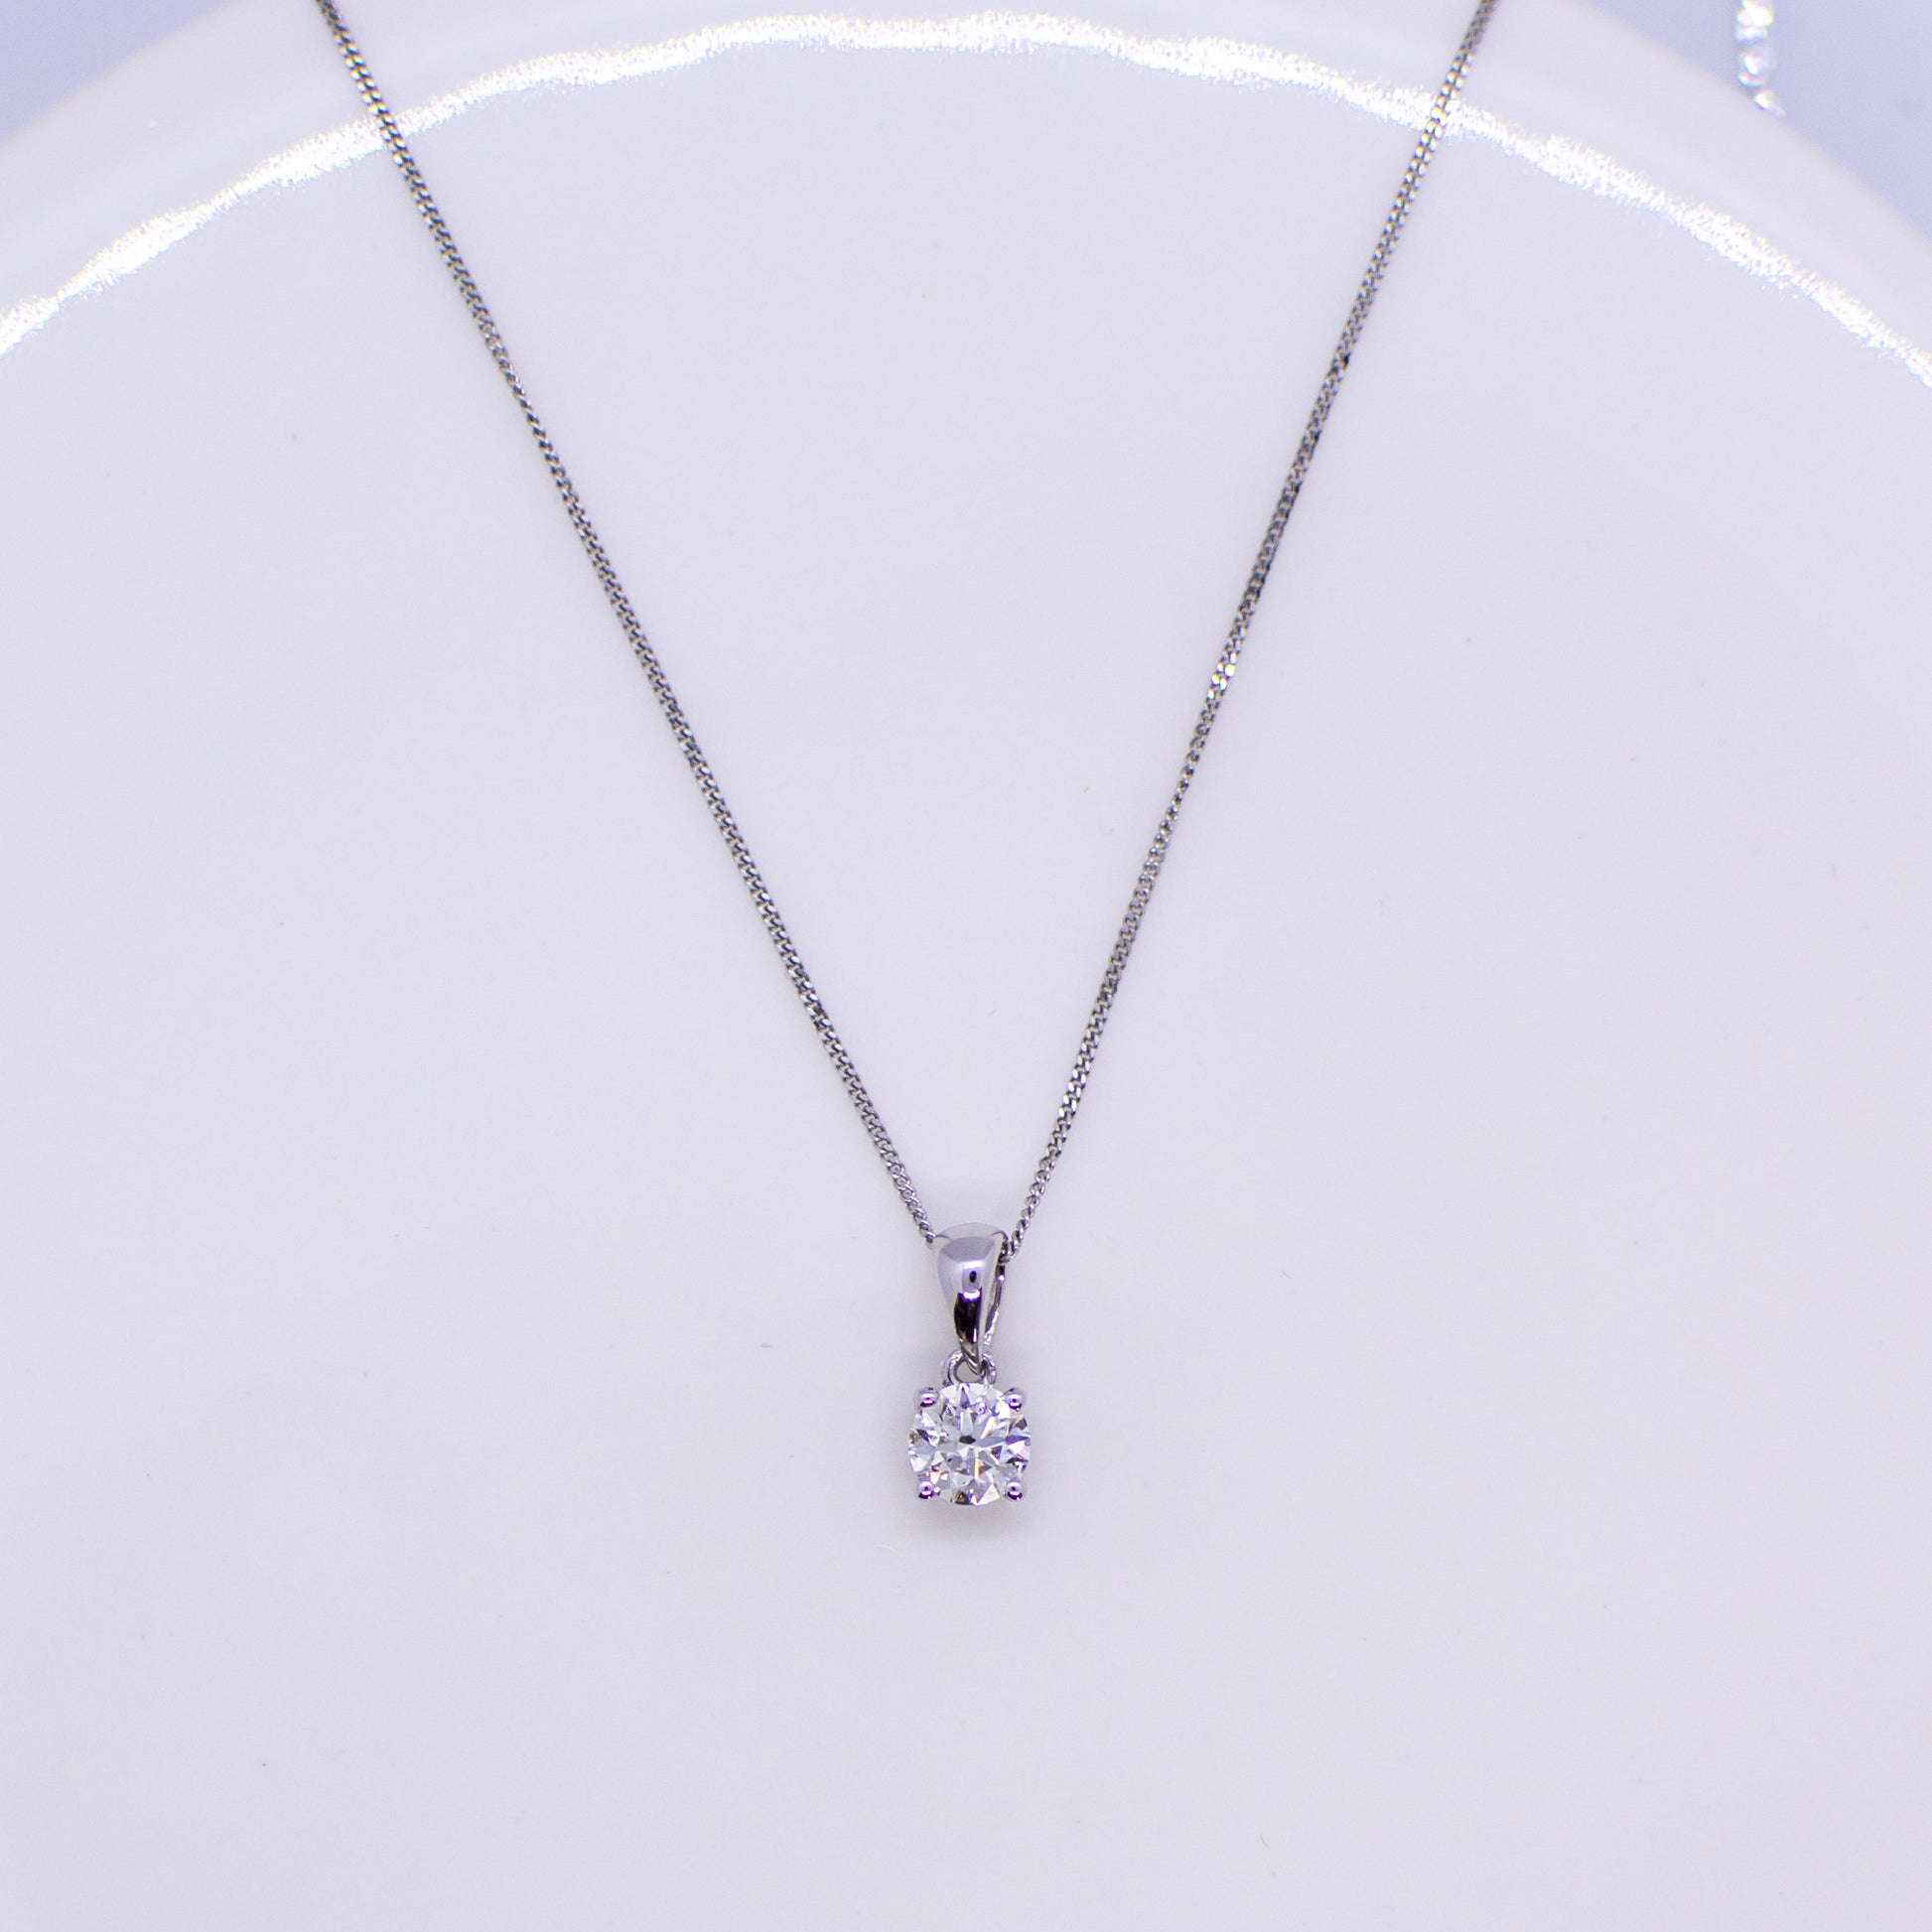 This delicate necklace comprises a single round brilliant cut diamond, in an 18ct white gold four claw setting and a 44cm long 18ct white gold fine curb chain with bolt ring clasp.